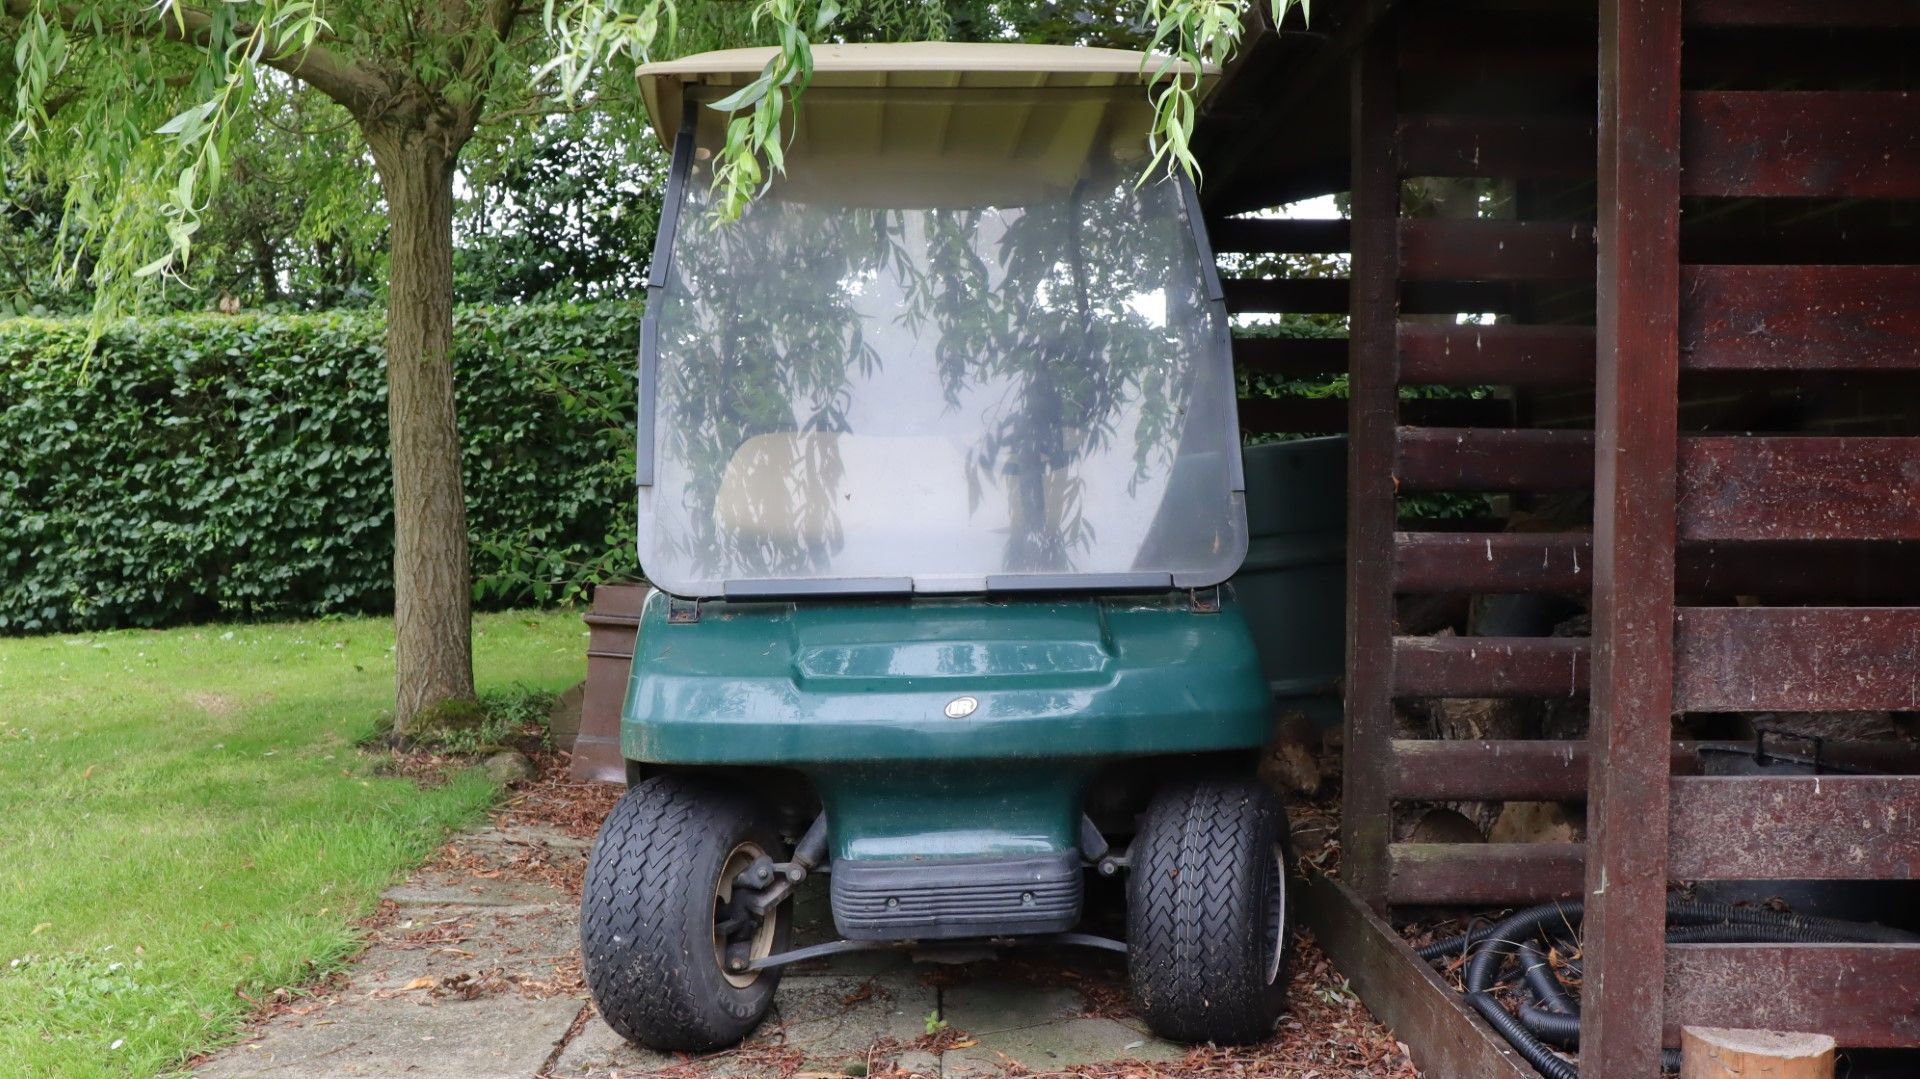 Electric Golf Buggy - Image 3 of 3